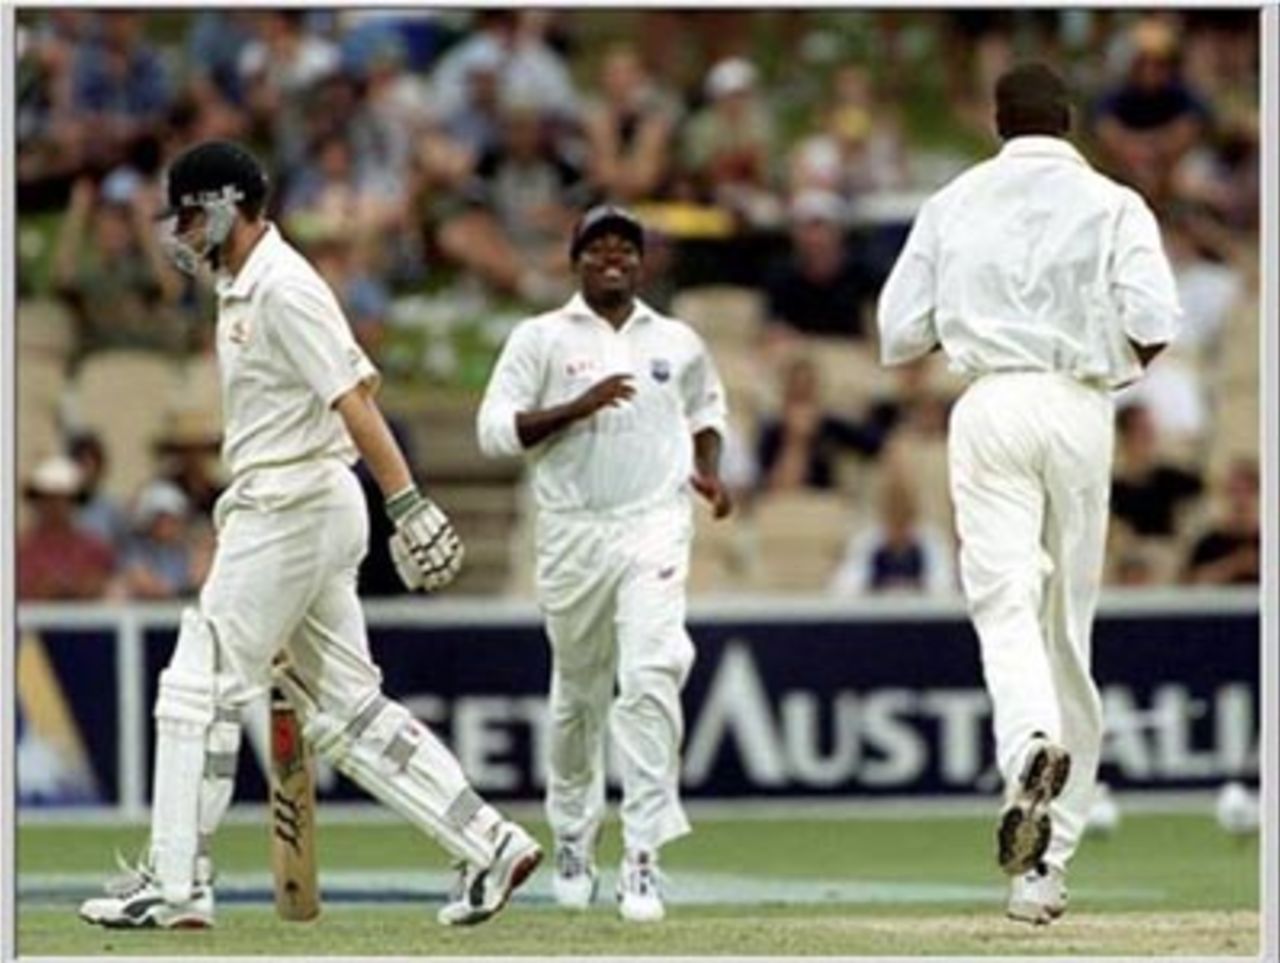 Australia v West Indies, 3rd Test in the 2000/01 series played at the Adelaide Oval, December 2000